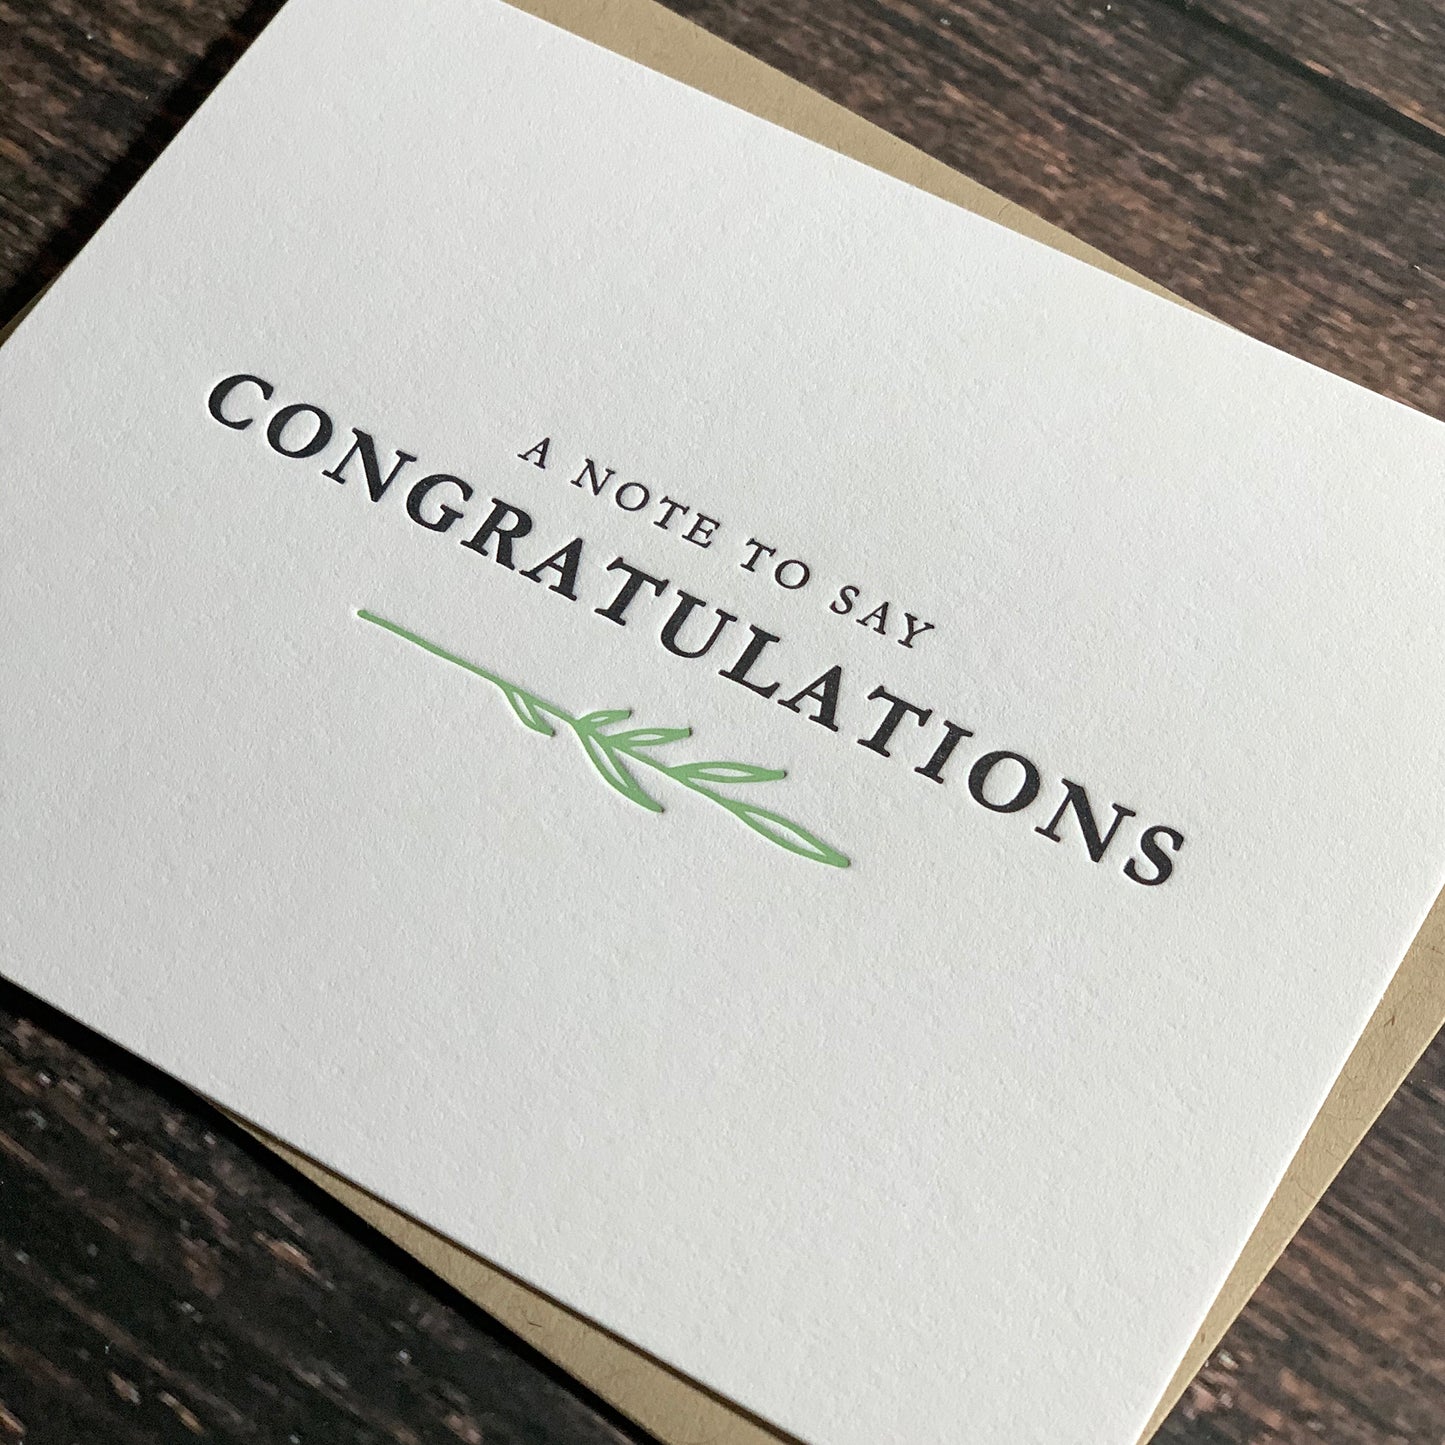 Congratulations Card, Letterpress printed, Green botanical leaf, A note to say congratulations, envelope included